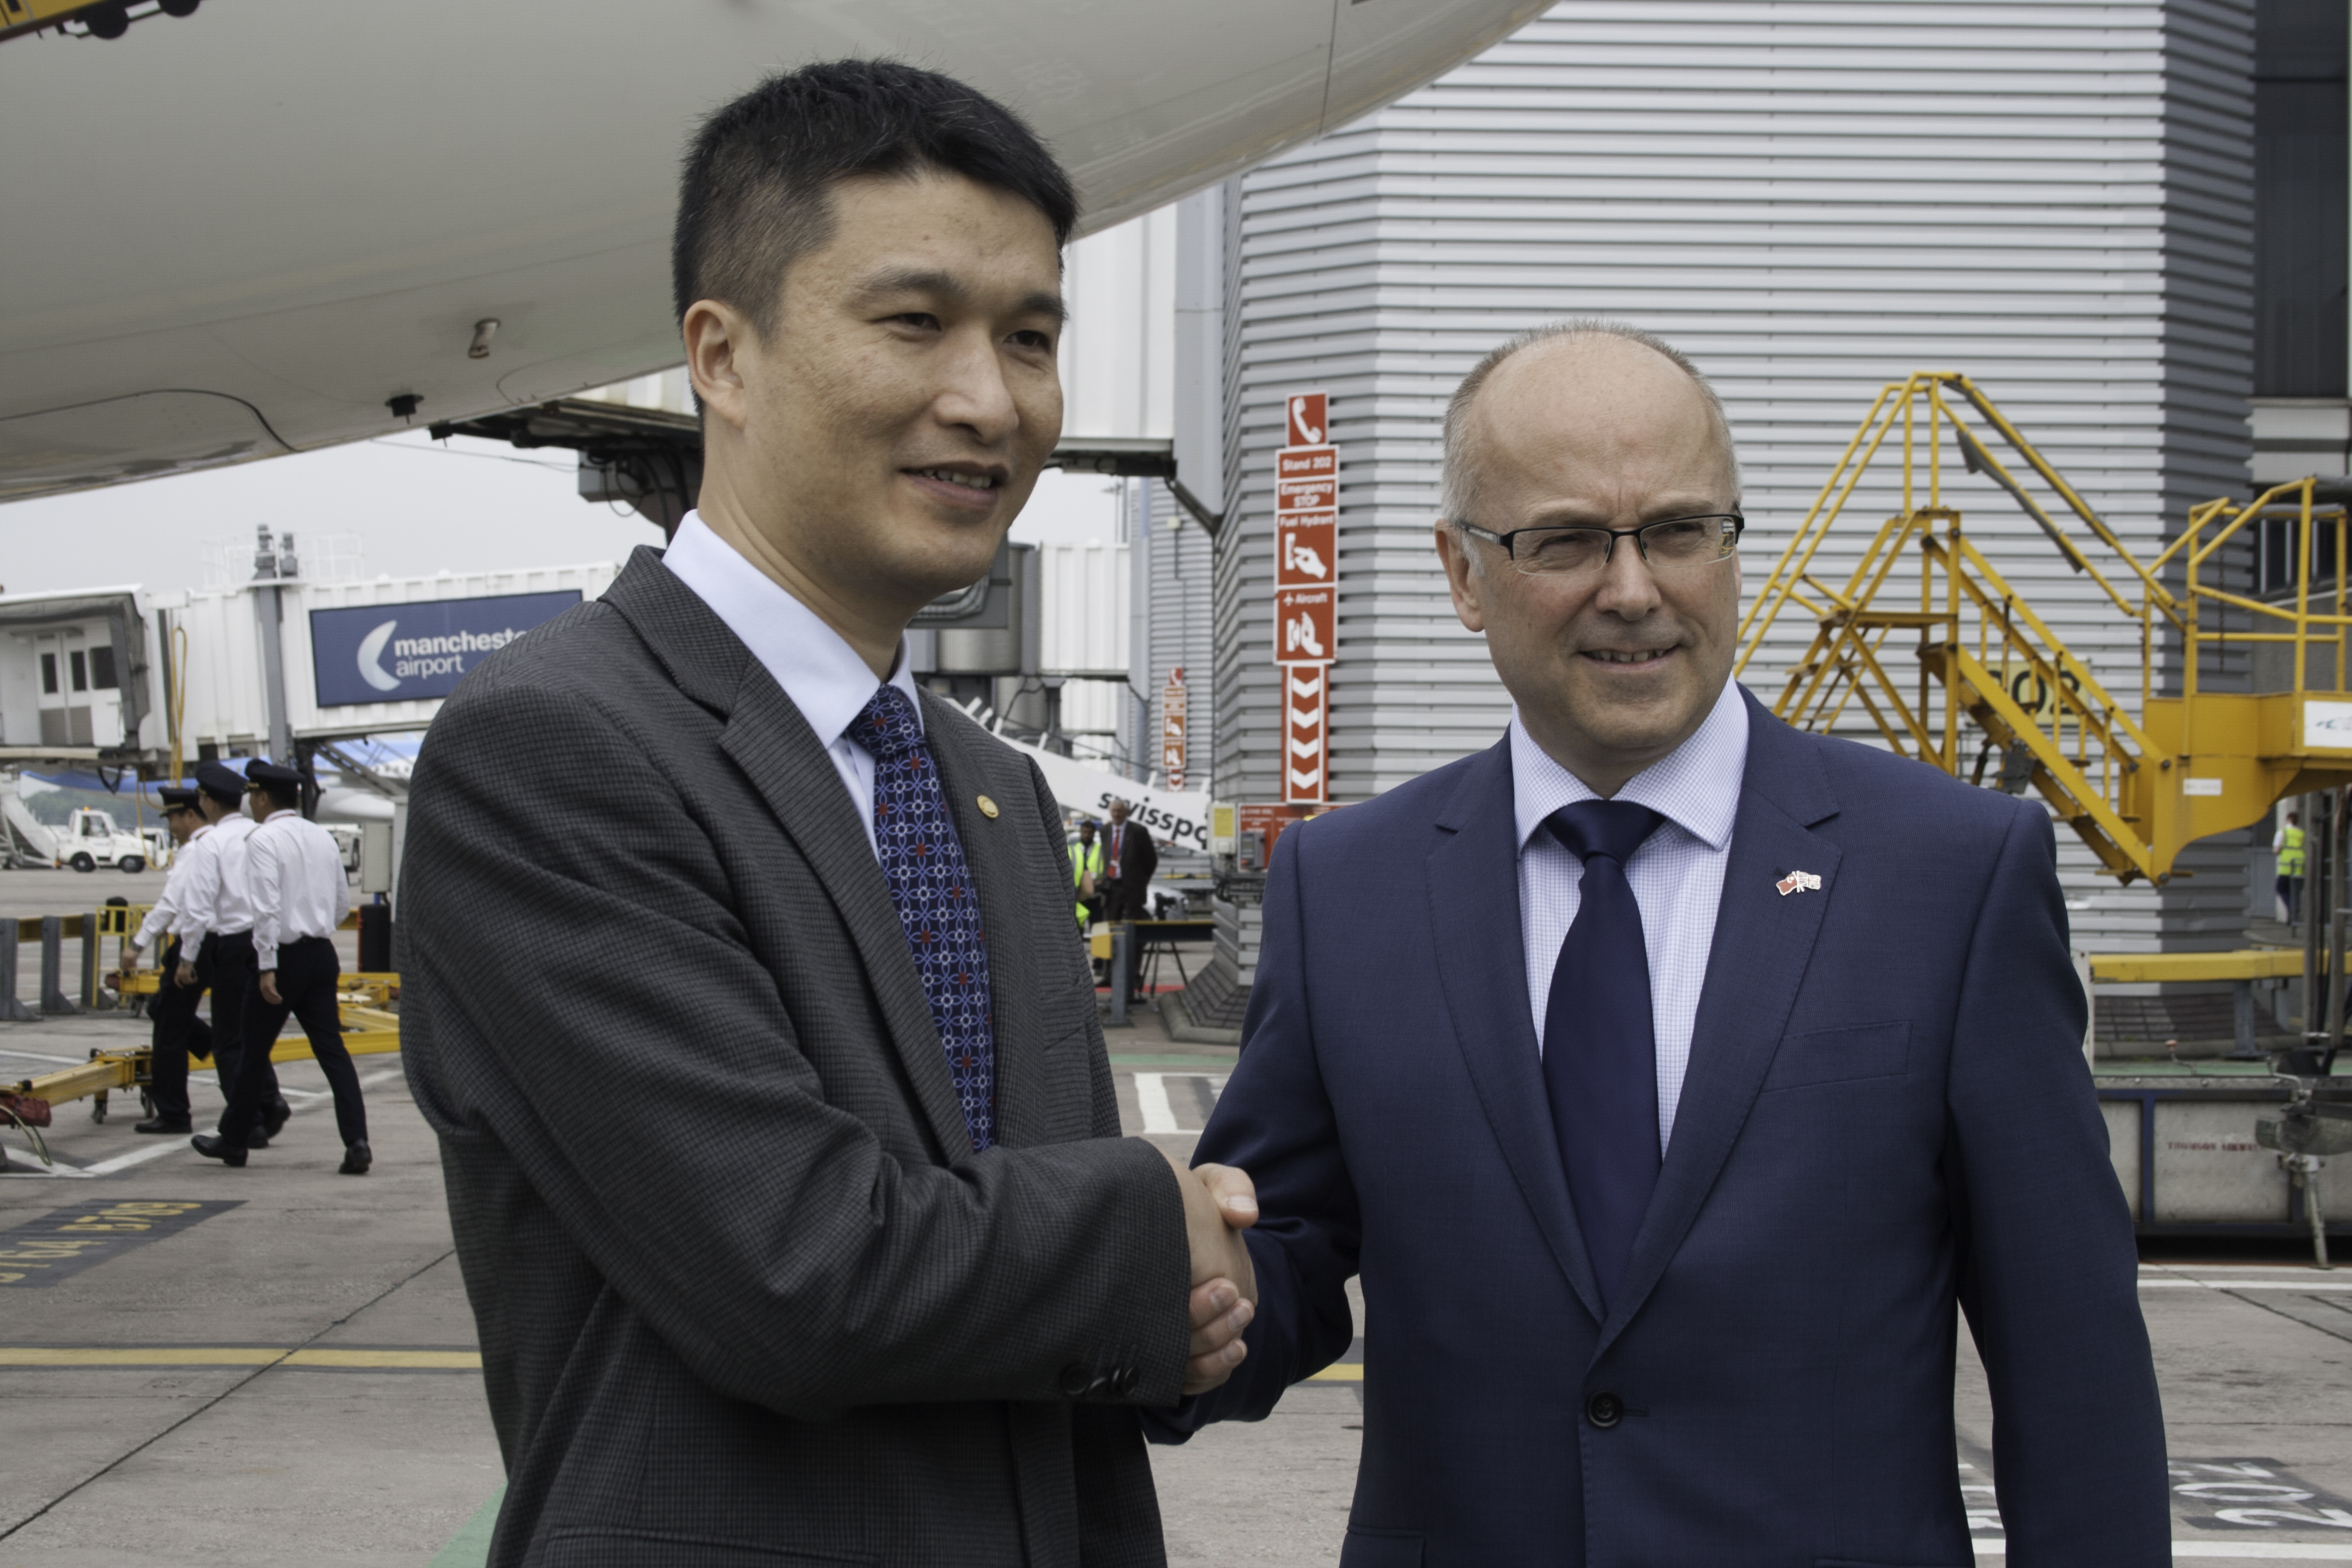 Picture of Hainan Airlines President Xie Haoming and Charlie Cornish, the CEO of MAG shaking hands and giving the aircraft the final send-off before departure! - Picture by James Field.